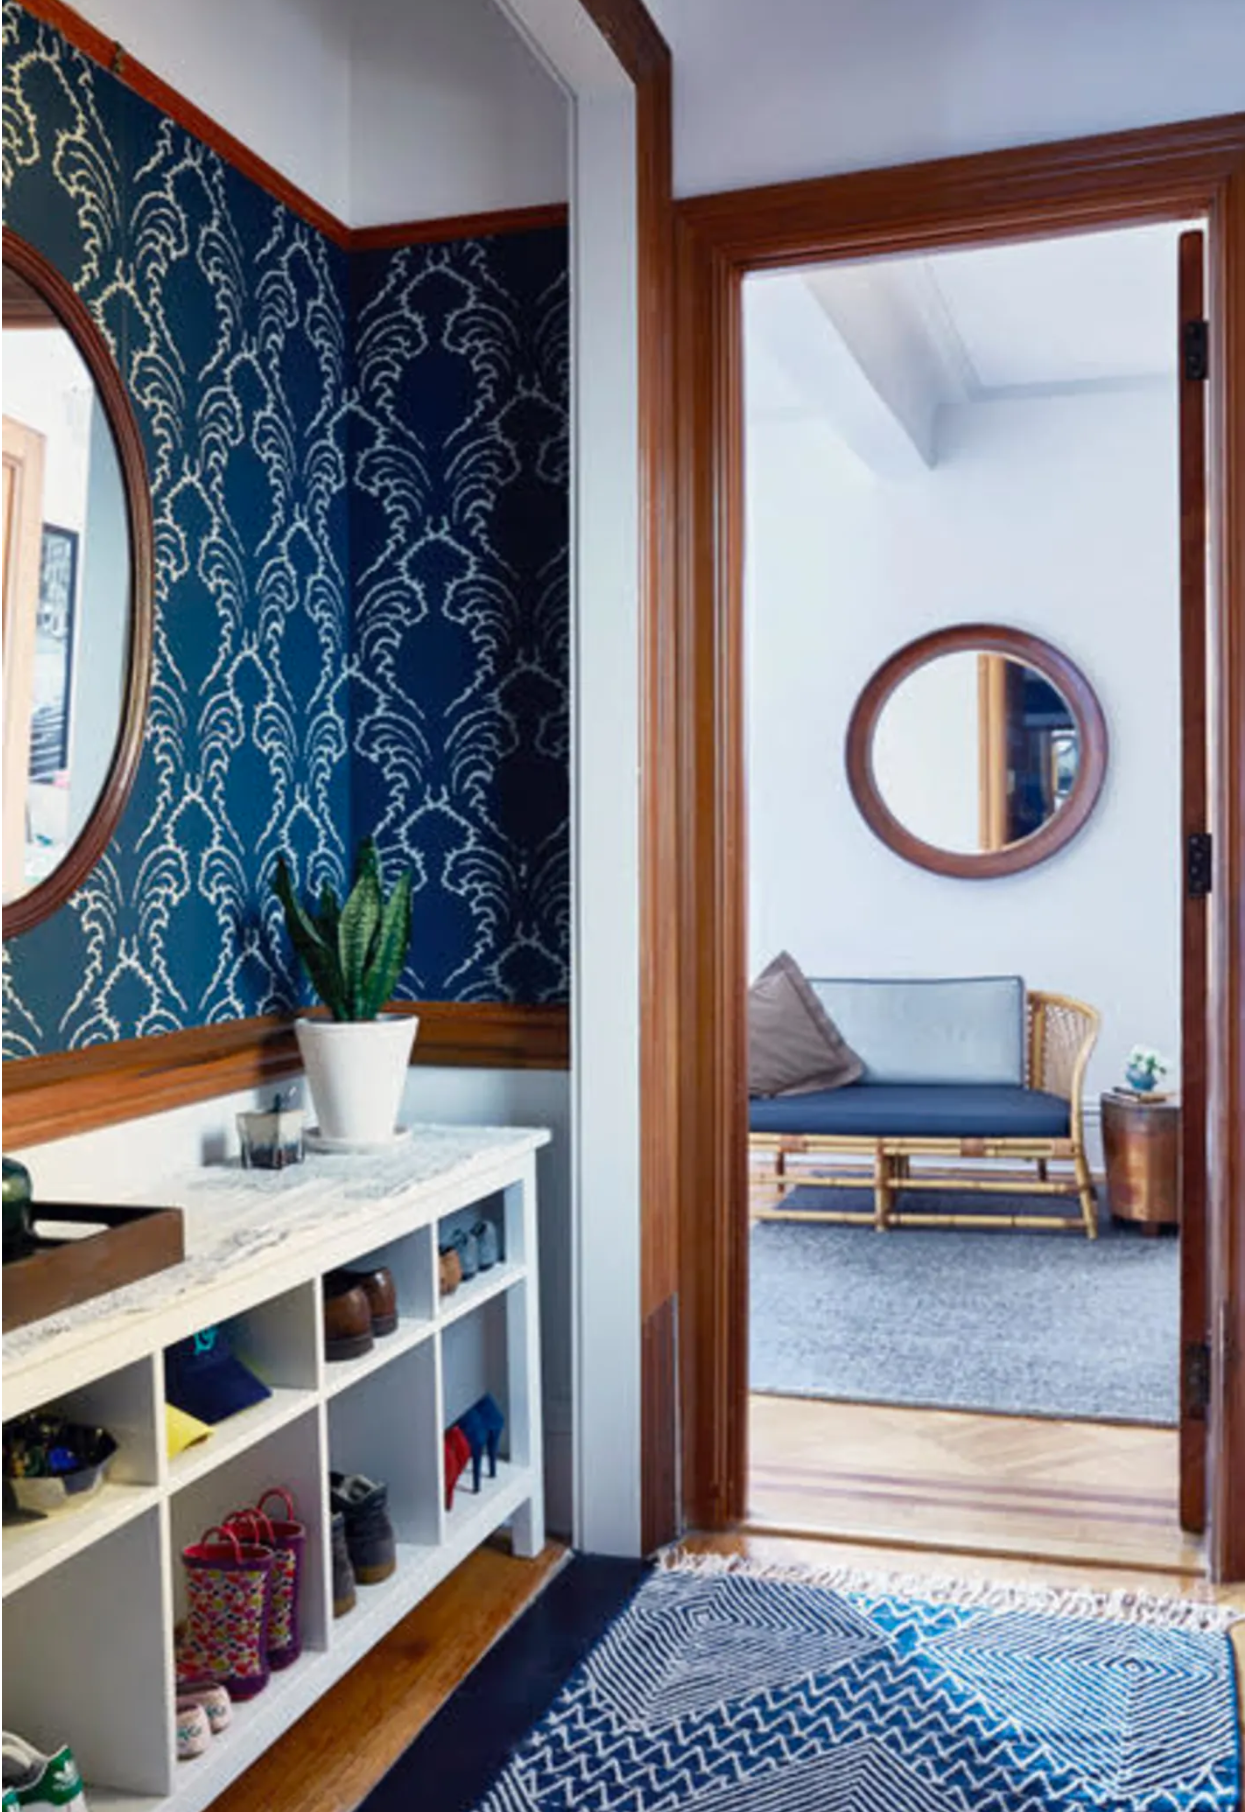 The 15 Best Sources for Outfitting Your Small Space